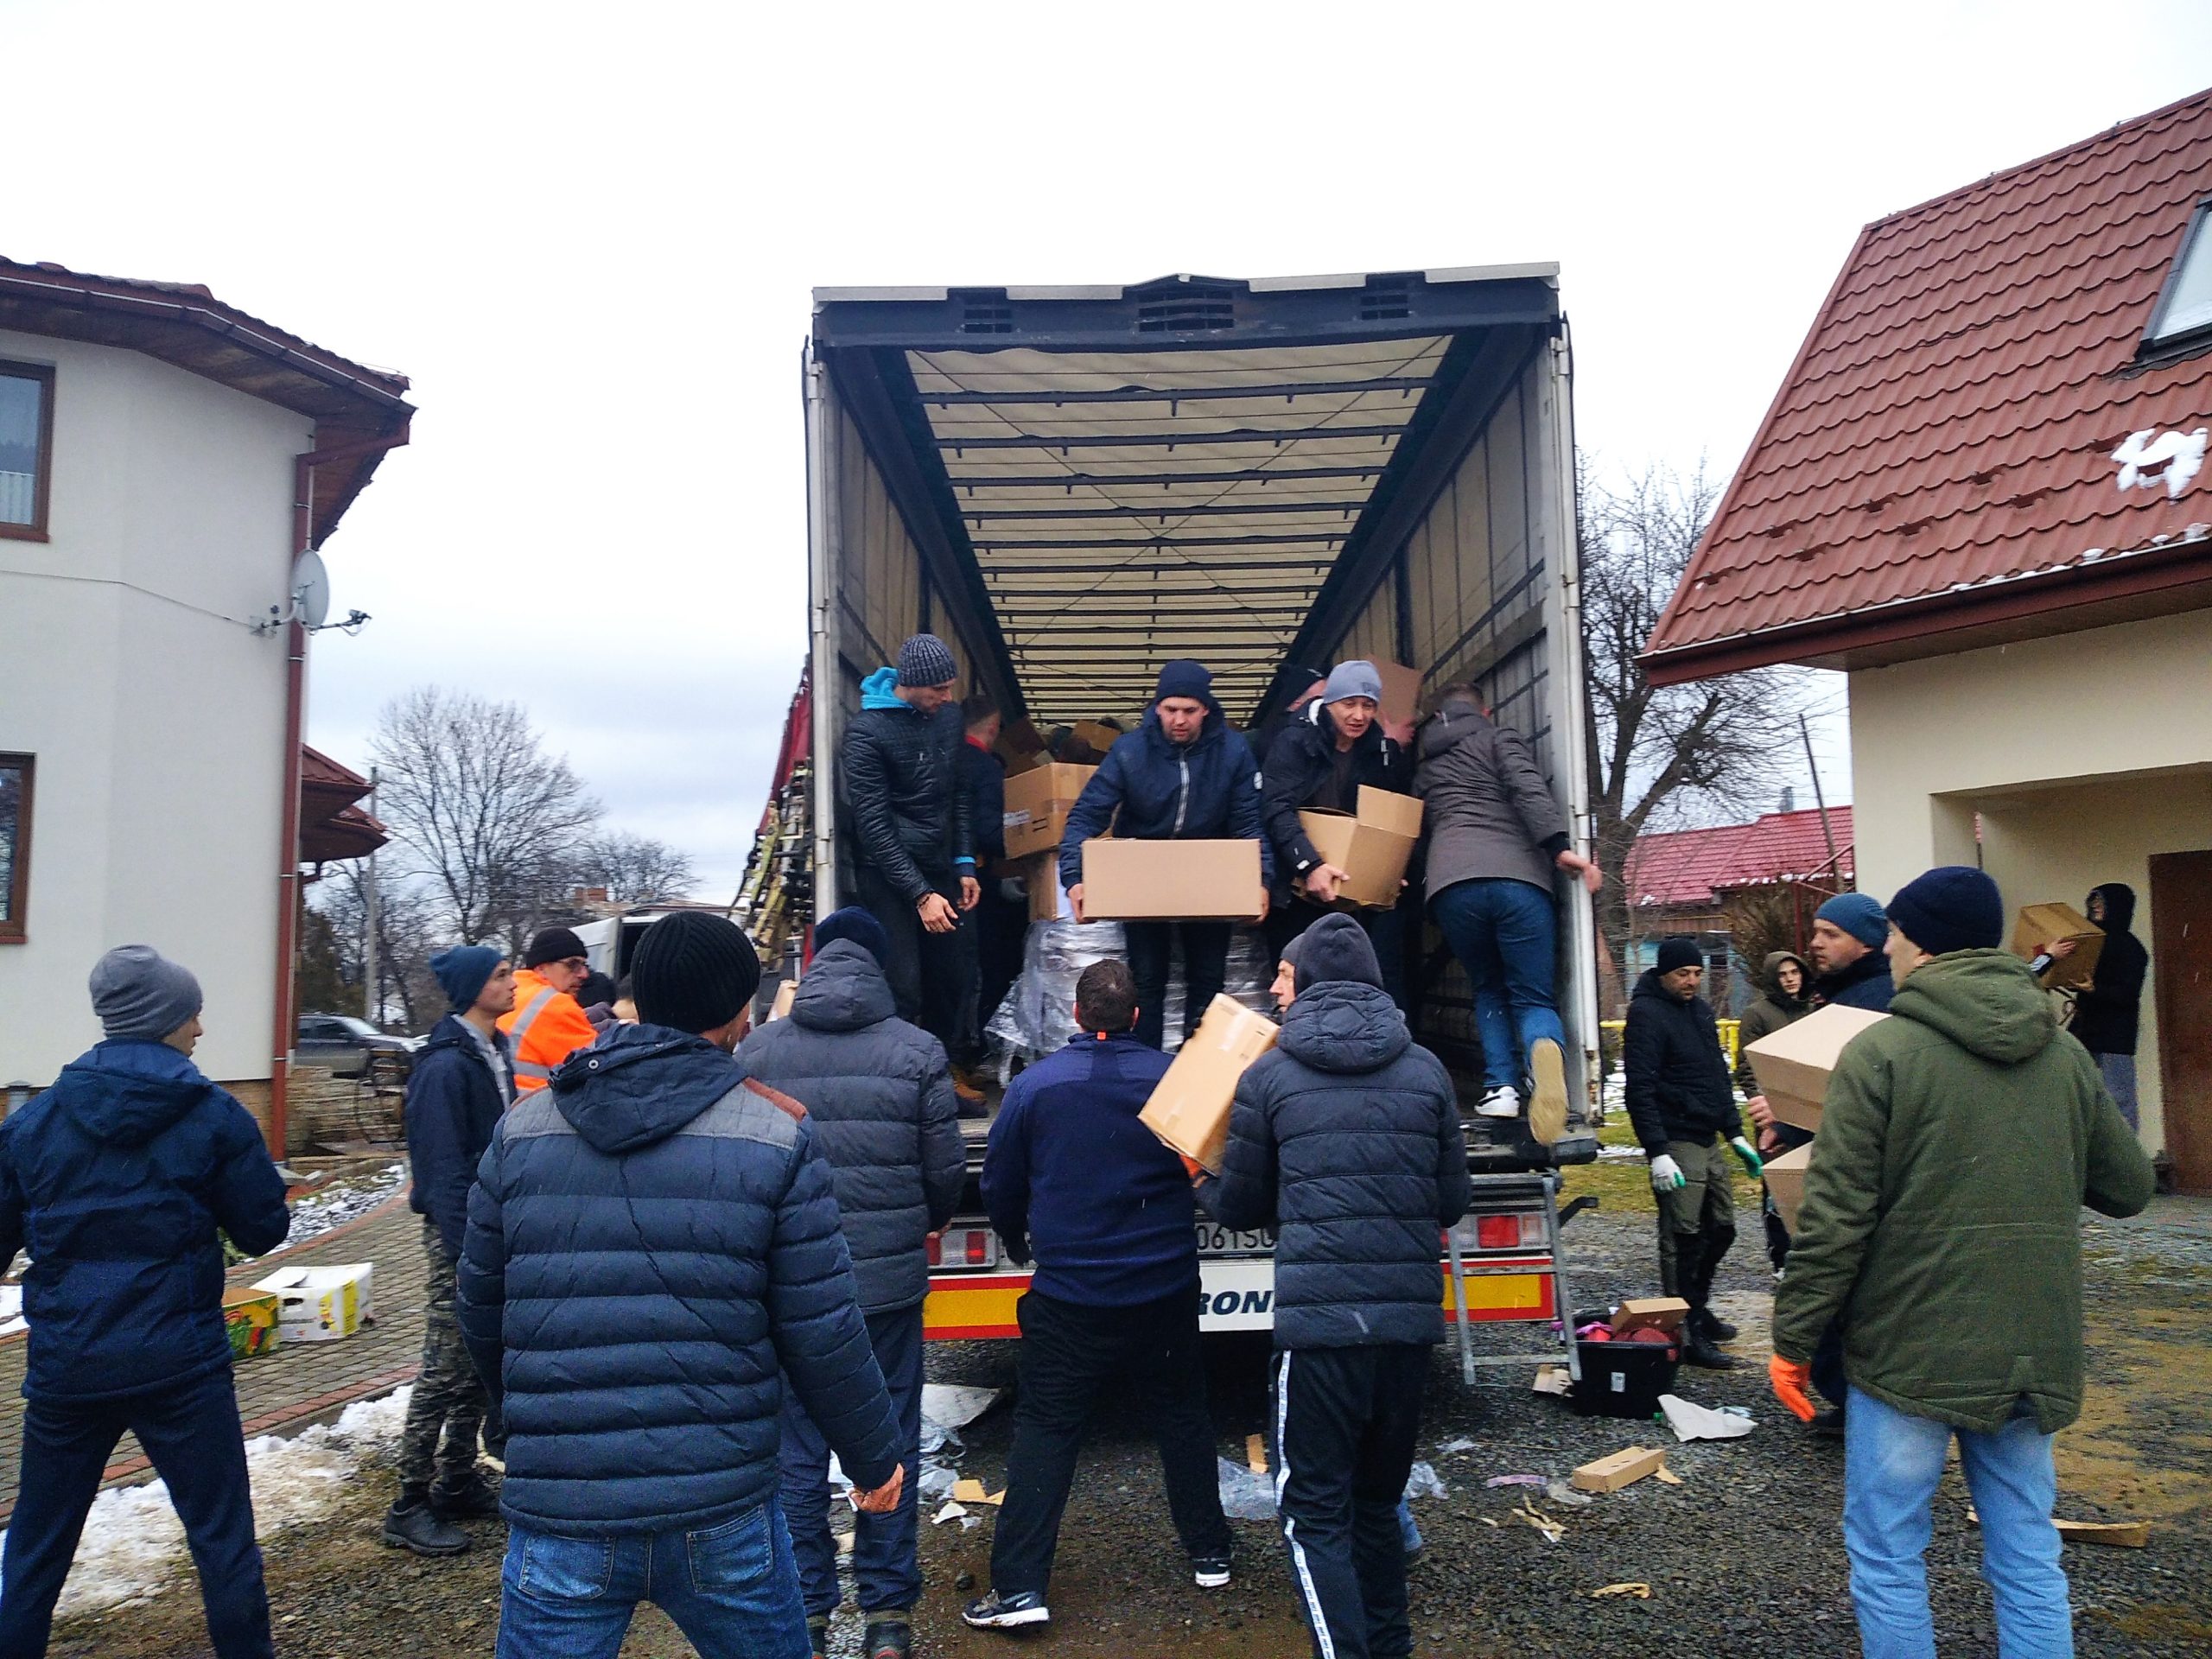 Updates on the current situation and humanitarian efforts of the Claretians in Ukraine